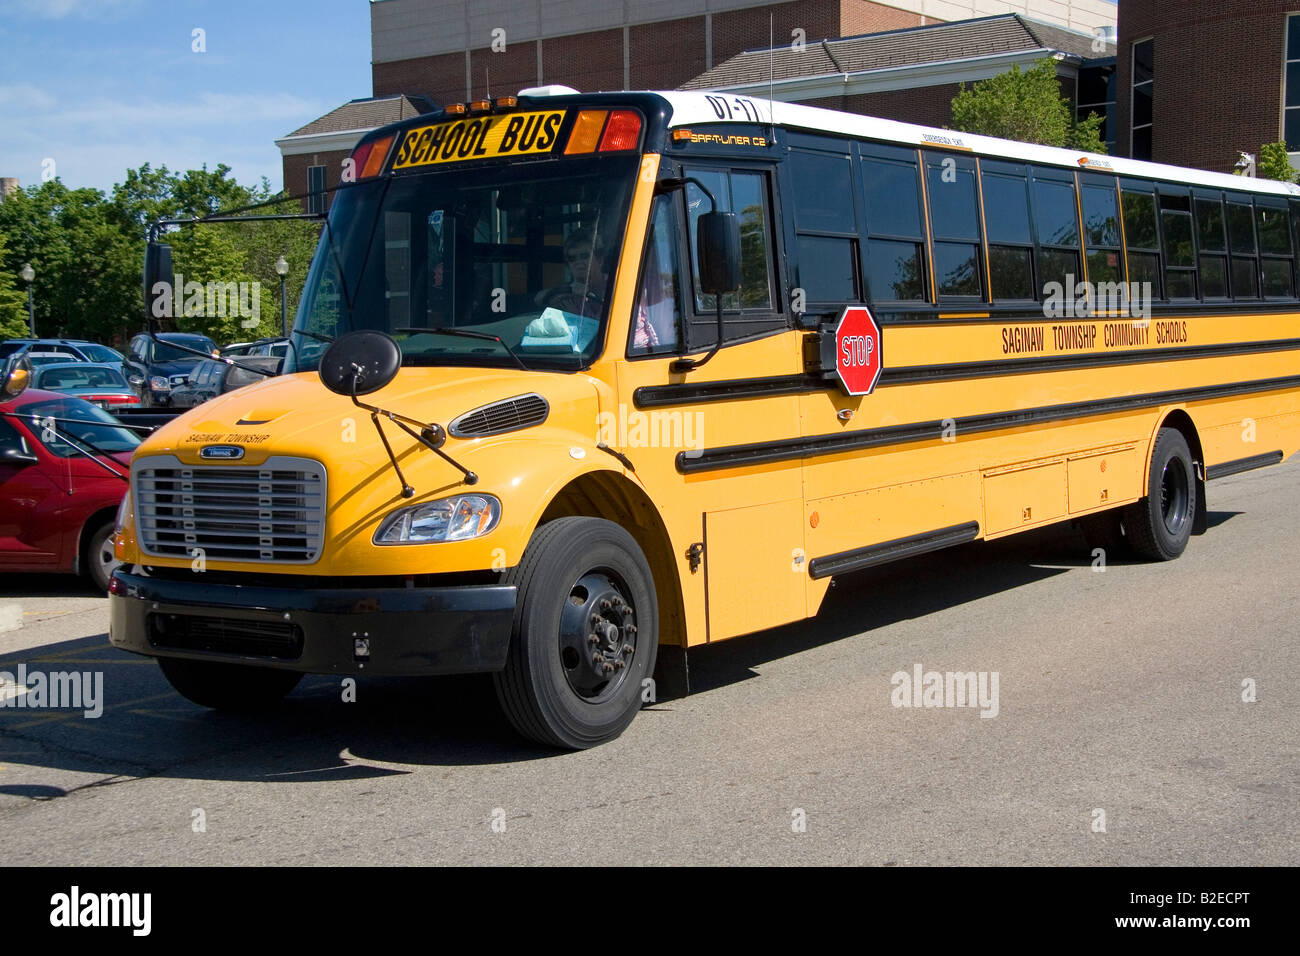 School bus parked outside the Henry Ford Museum in Dearborn Michigan Stock Photo